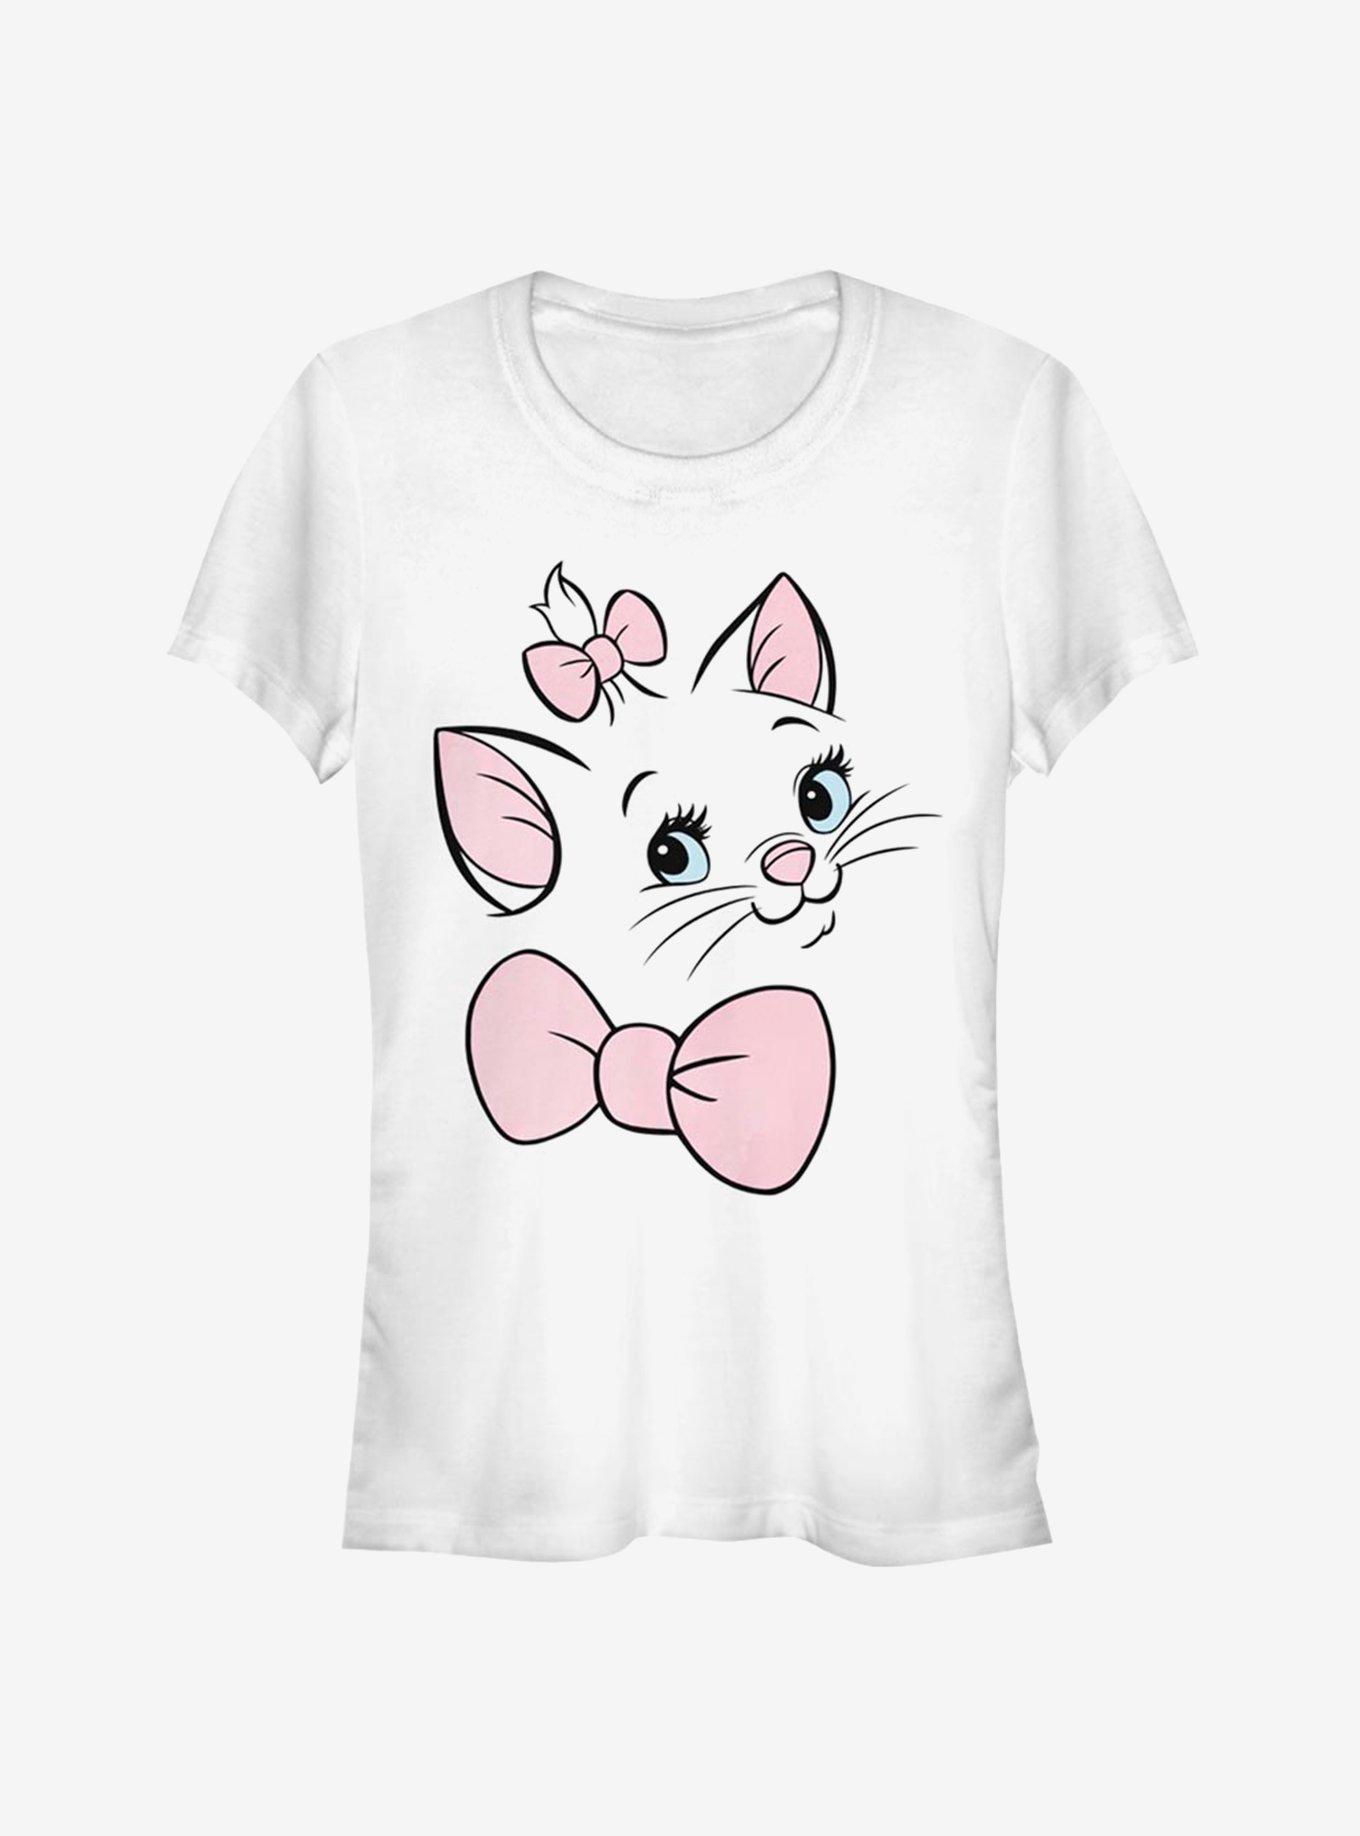 Disney Aristocats Marie Face Outline Classic Girls T-Shirt, WHITE, hi-res